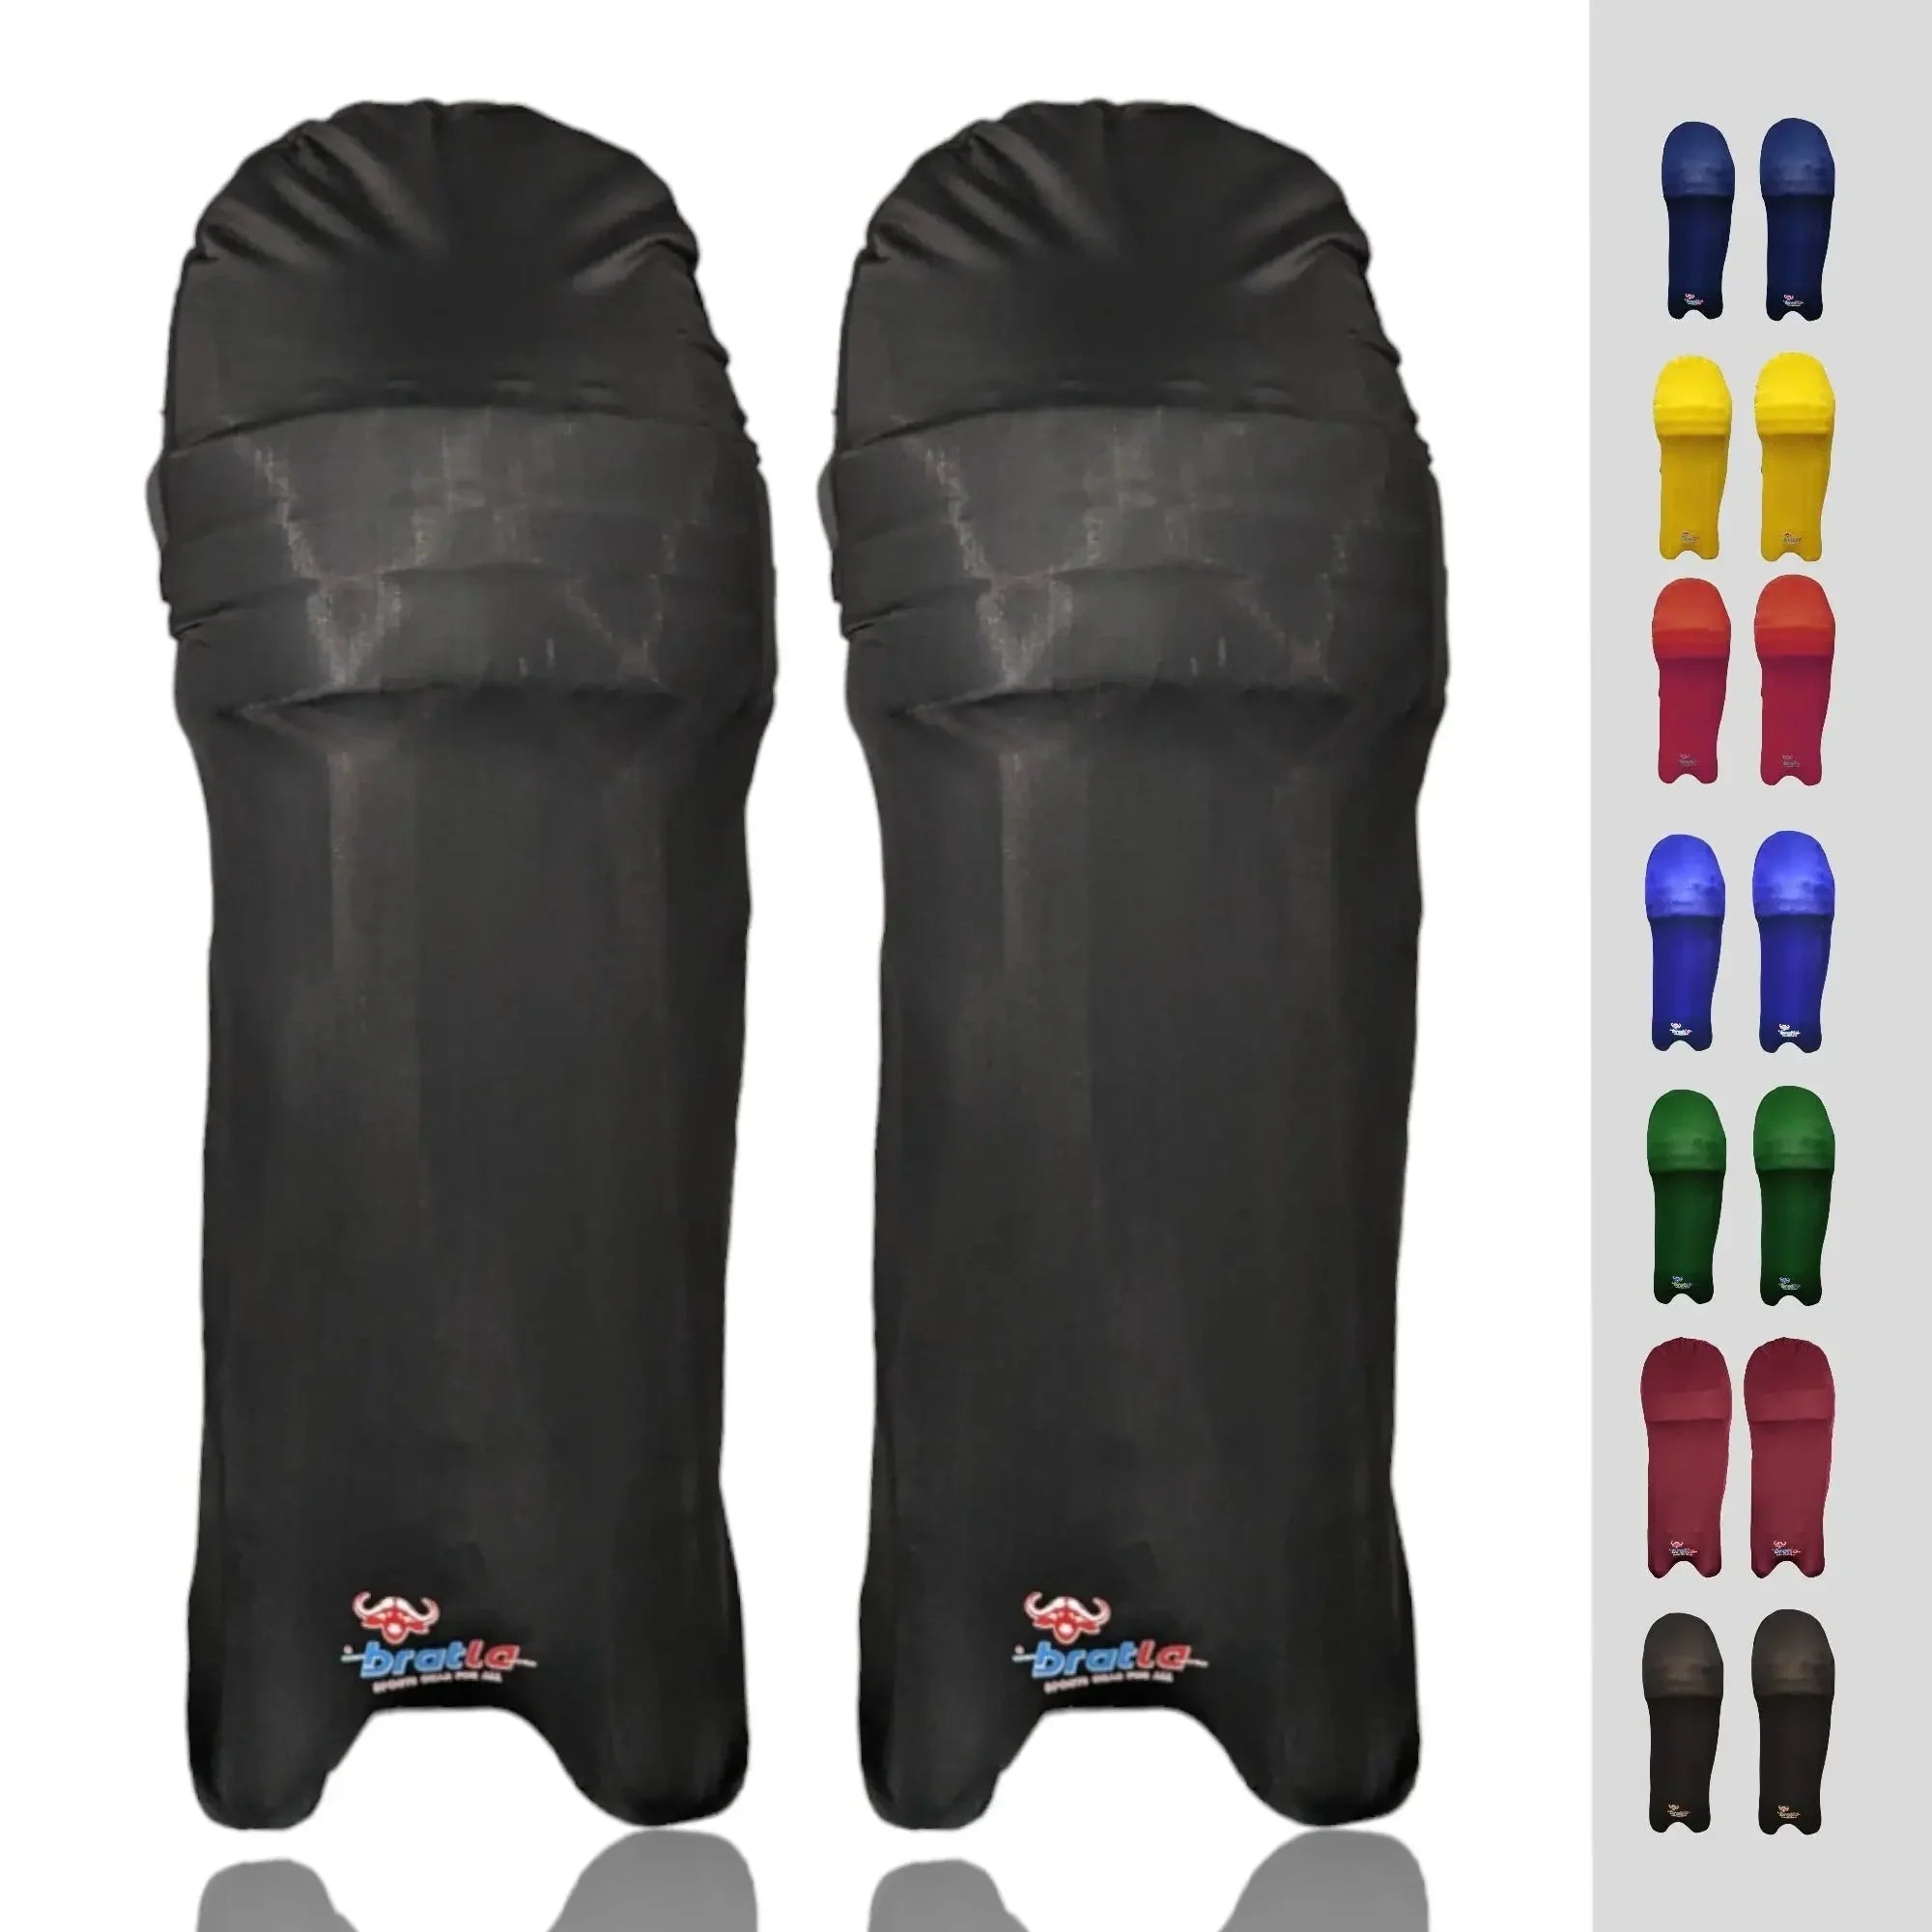 Bratla Cricket Batting Pad Covers Fit Neatly Easily Put On - Black - PADS - BATTING COVER